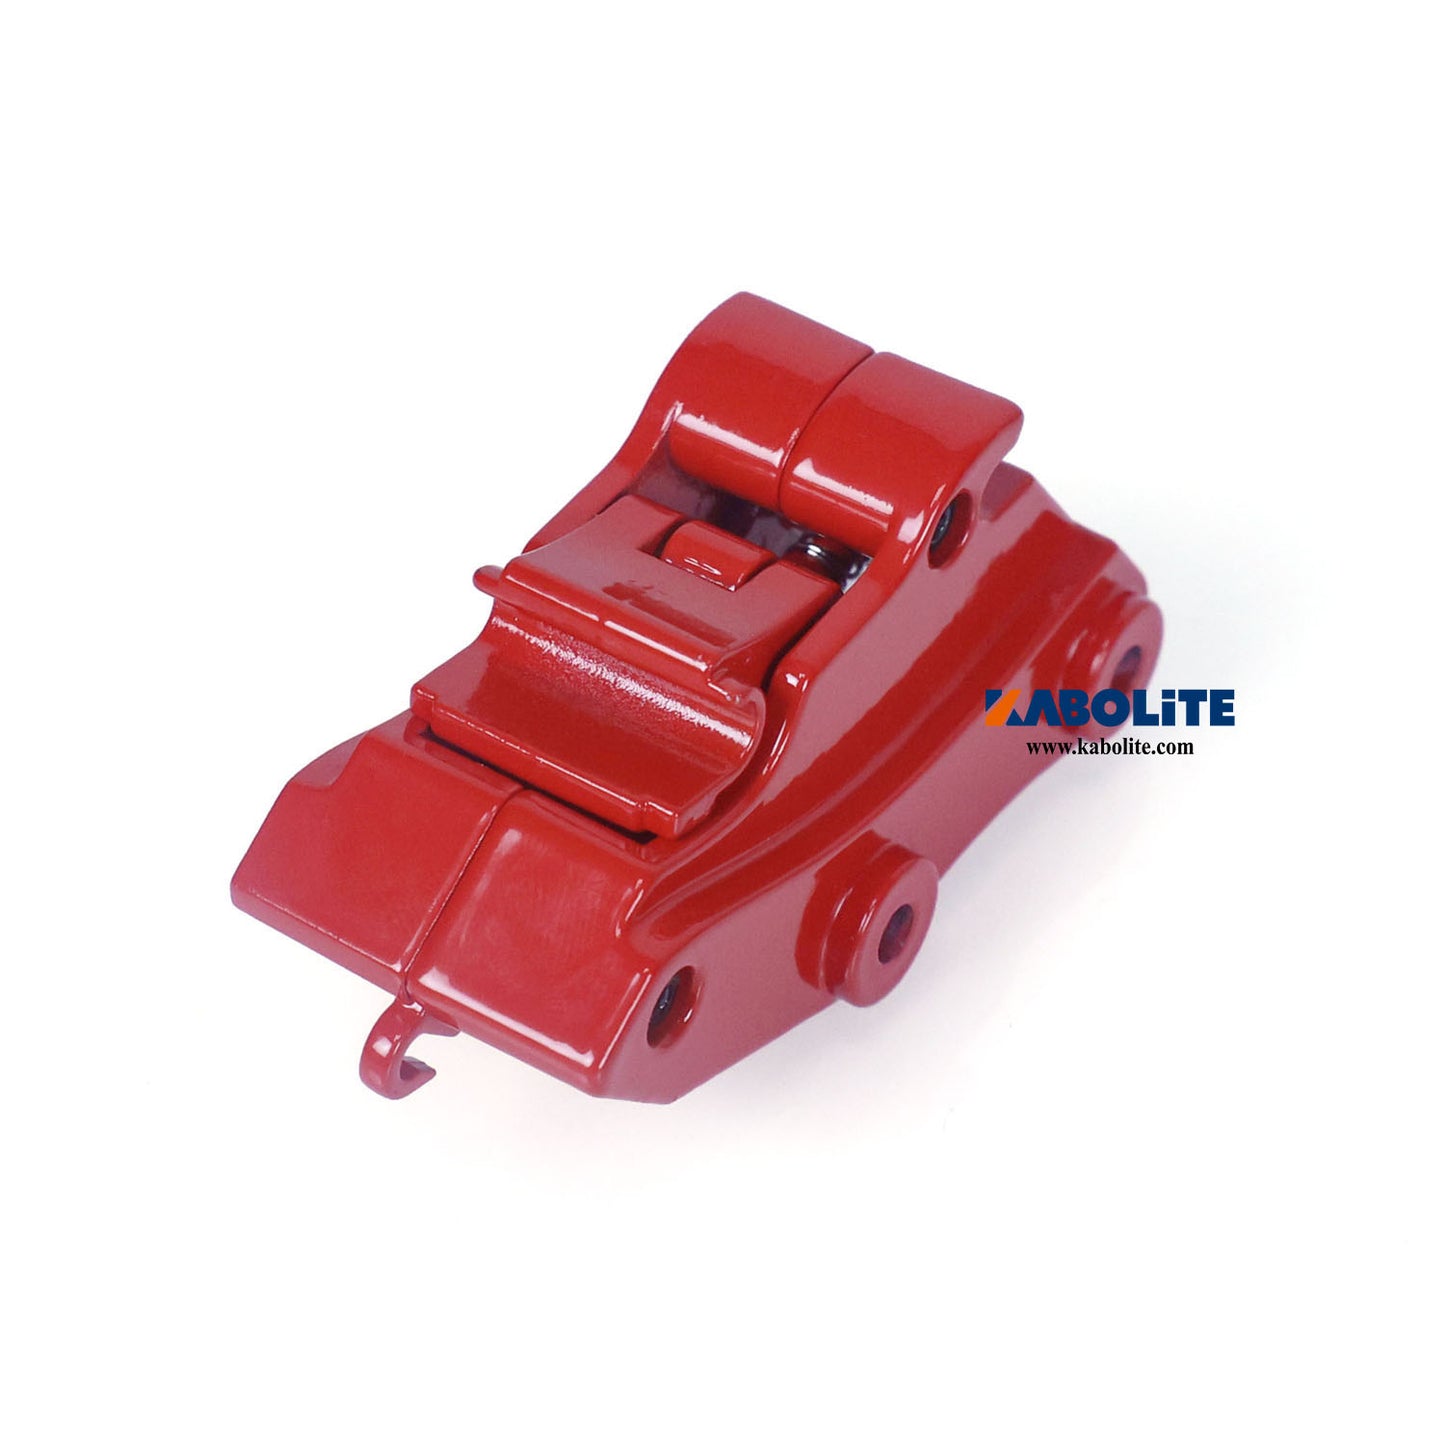 Quick Released Coupler Electric Hammer Claws Rippers for 1/18 Kabolite RC Hydraulic Excavator Radio Control Digger K961 100 100S